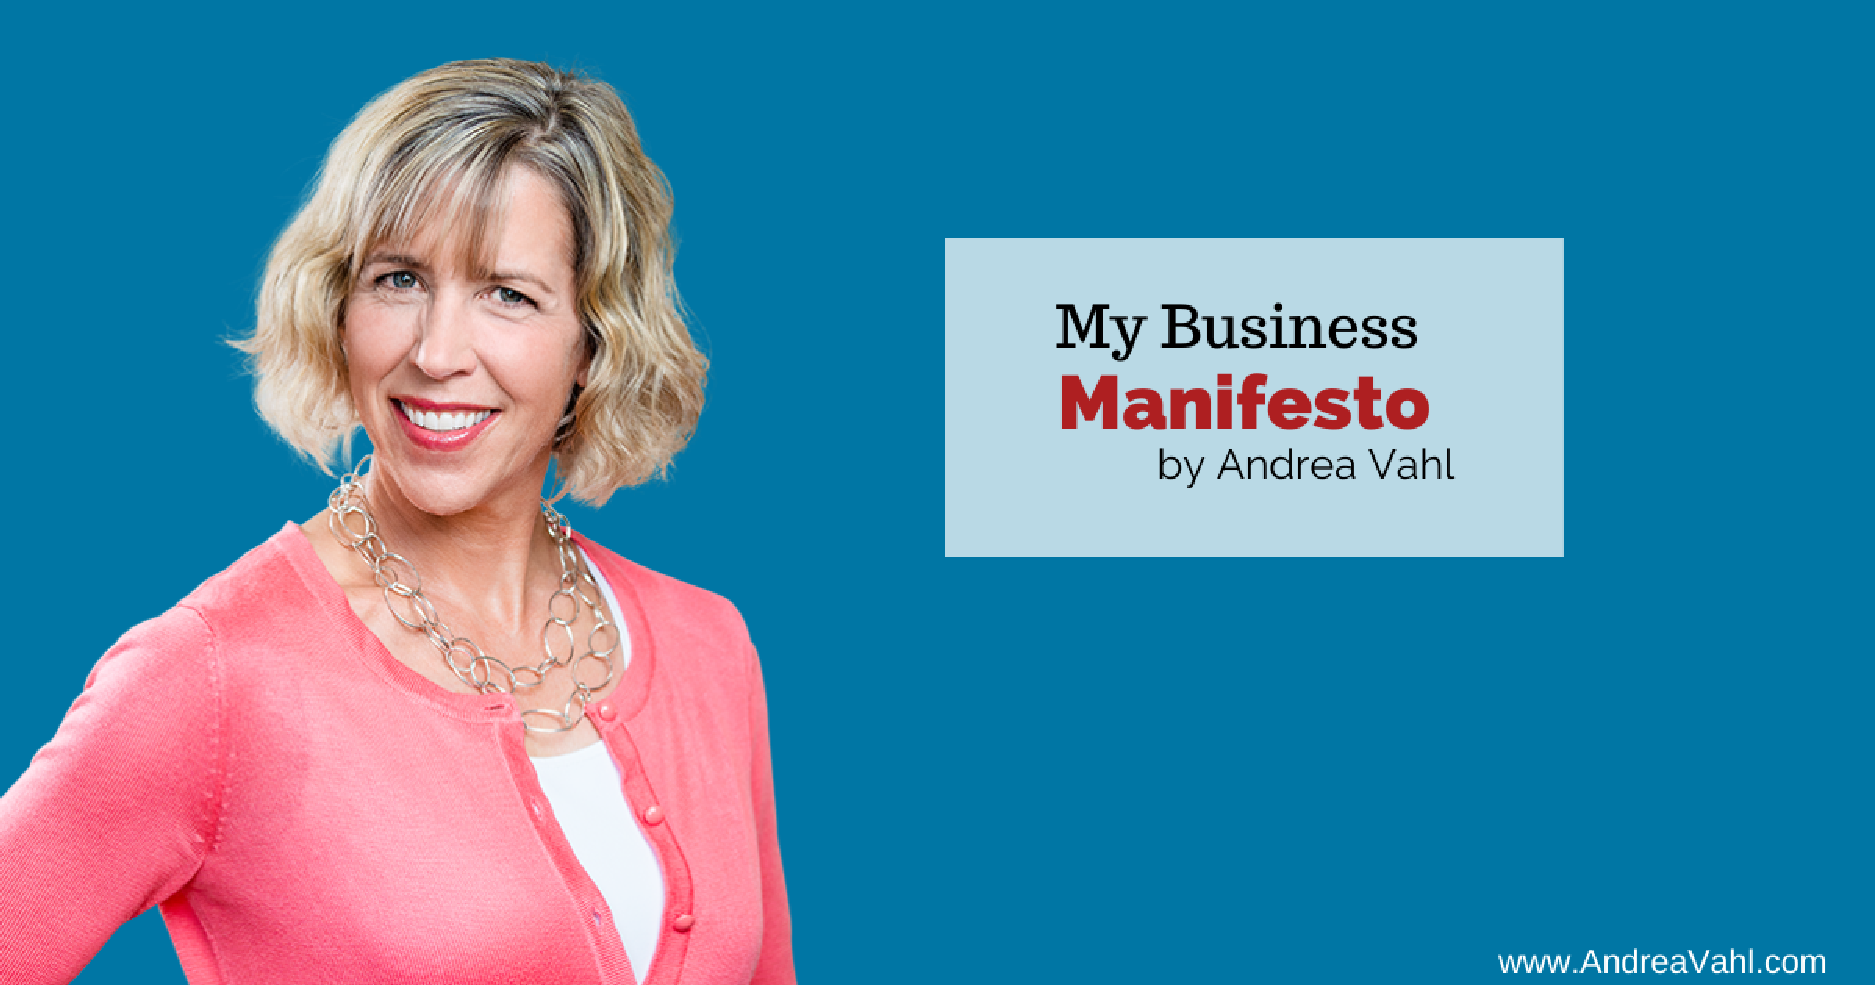 My Business manifesto by Andrea Vahl